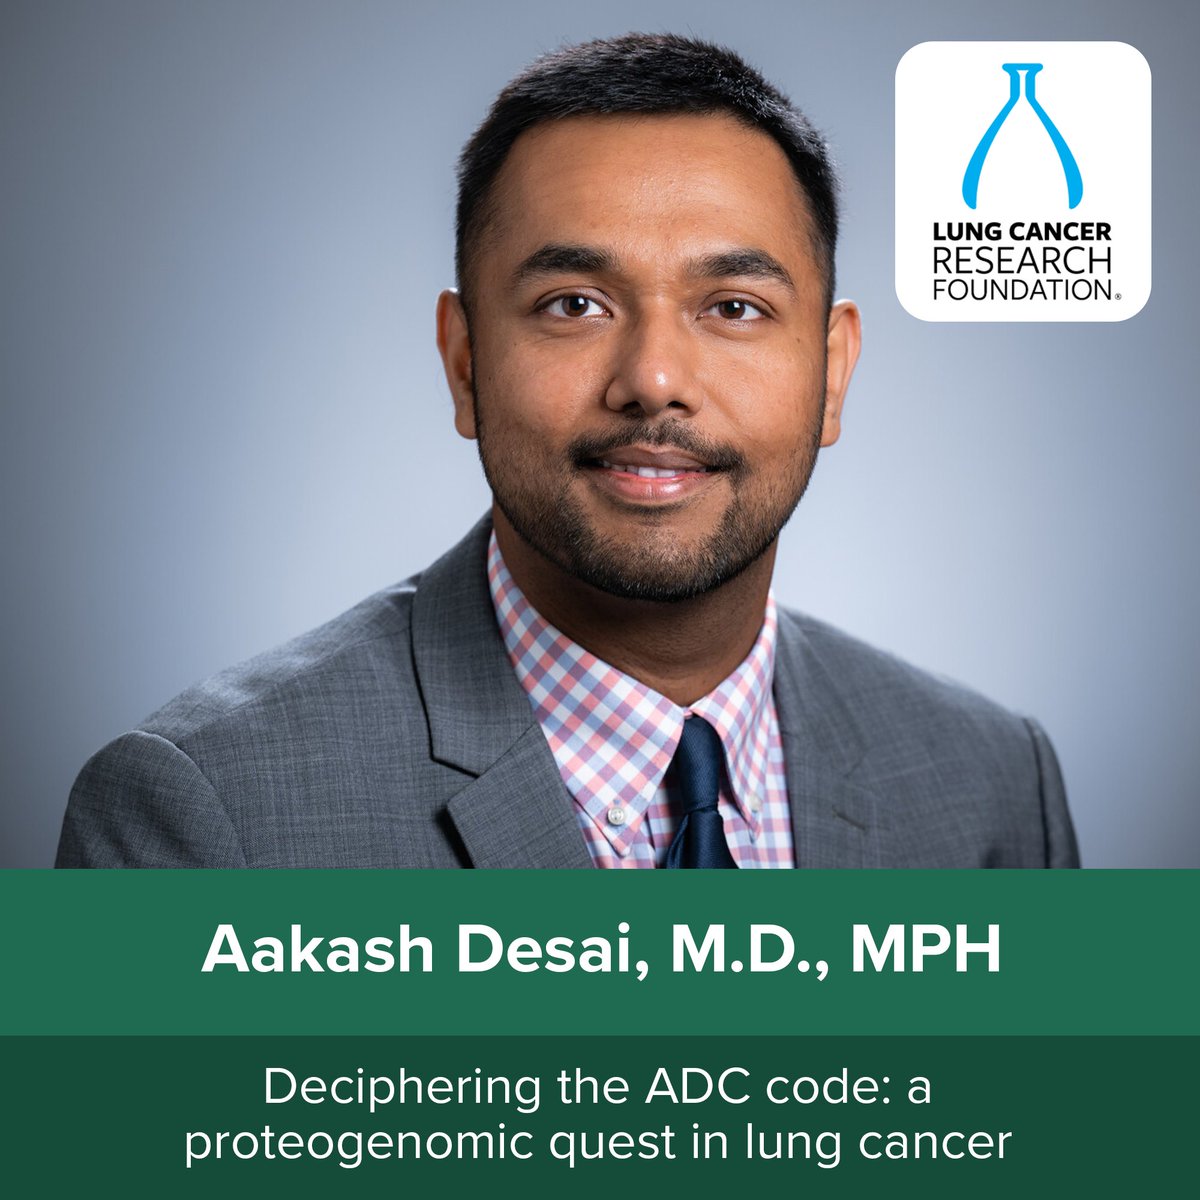 The Lung Cancer Research Foundation (@lcrf_org) recently awarded Aakash Desai, M.D., MPH, (@ADesaiMD) a research grant aimed at advancing understanding of antibody drug conjugates in lung cancer treatment. Read more: tinyurl.com/2u2bxcr4